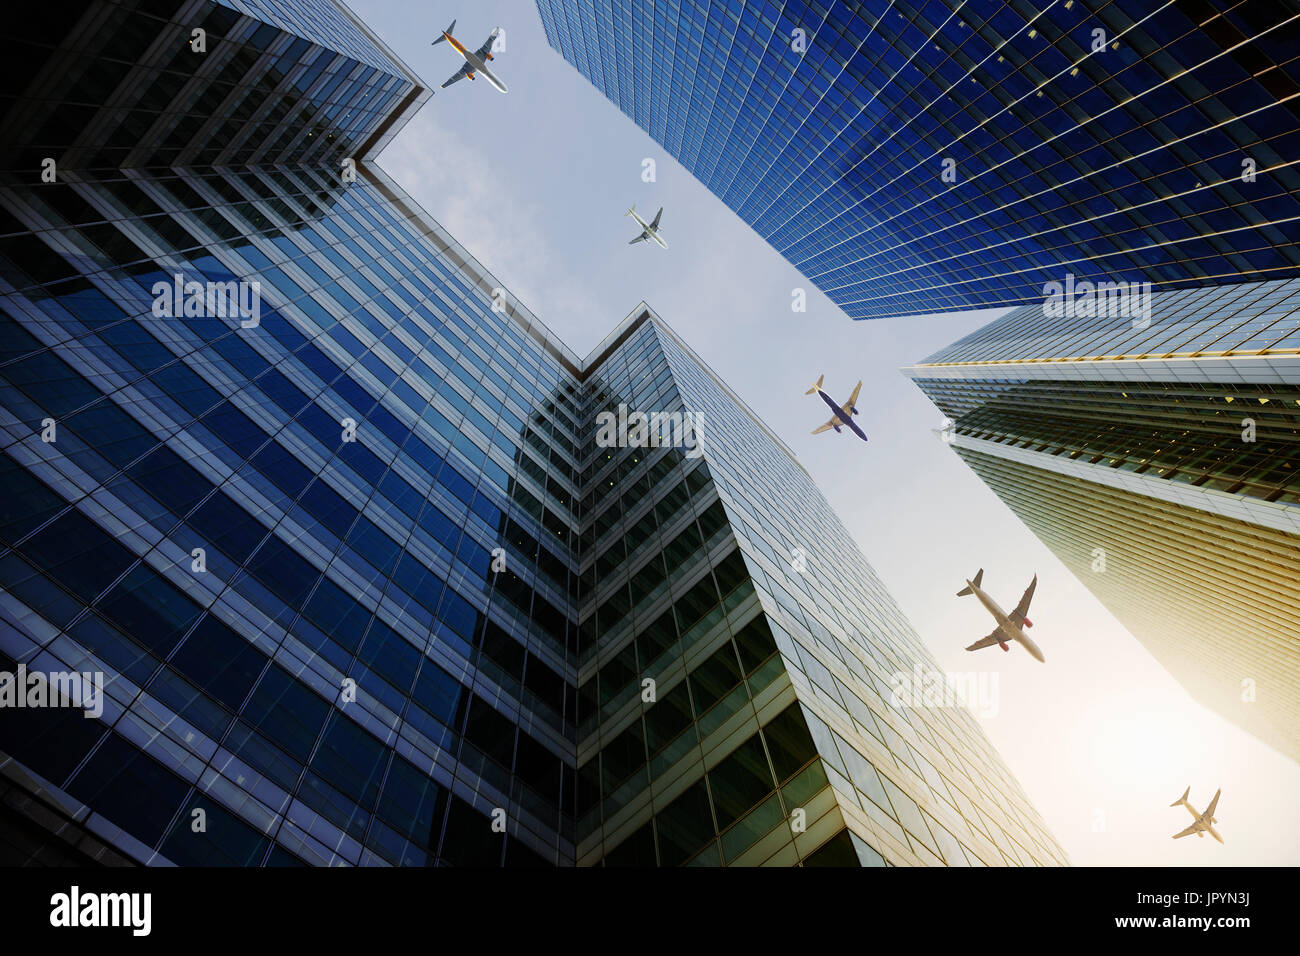 Airplanes flying in a row over highrise buildings, travel concept Stock Photo